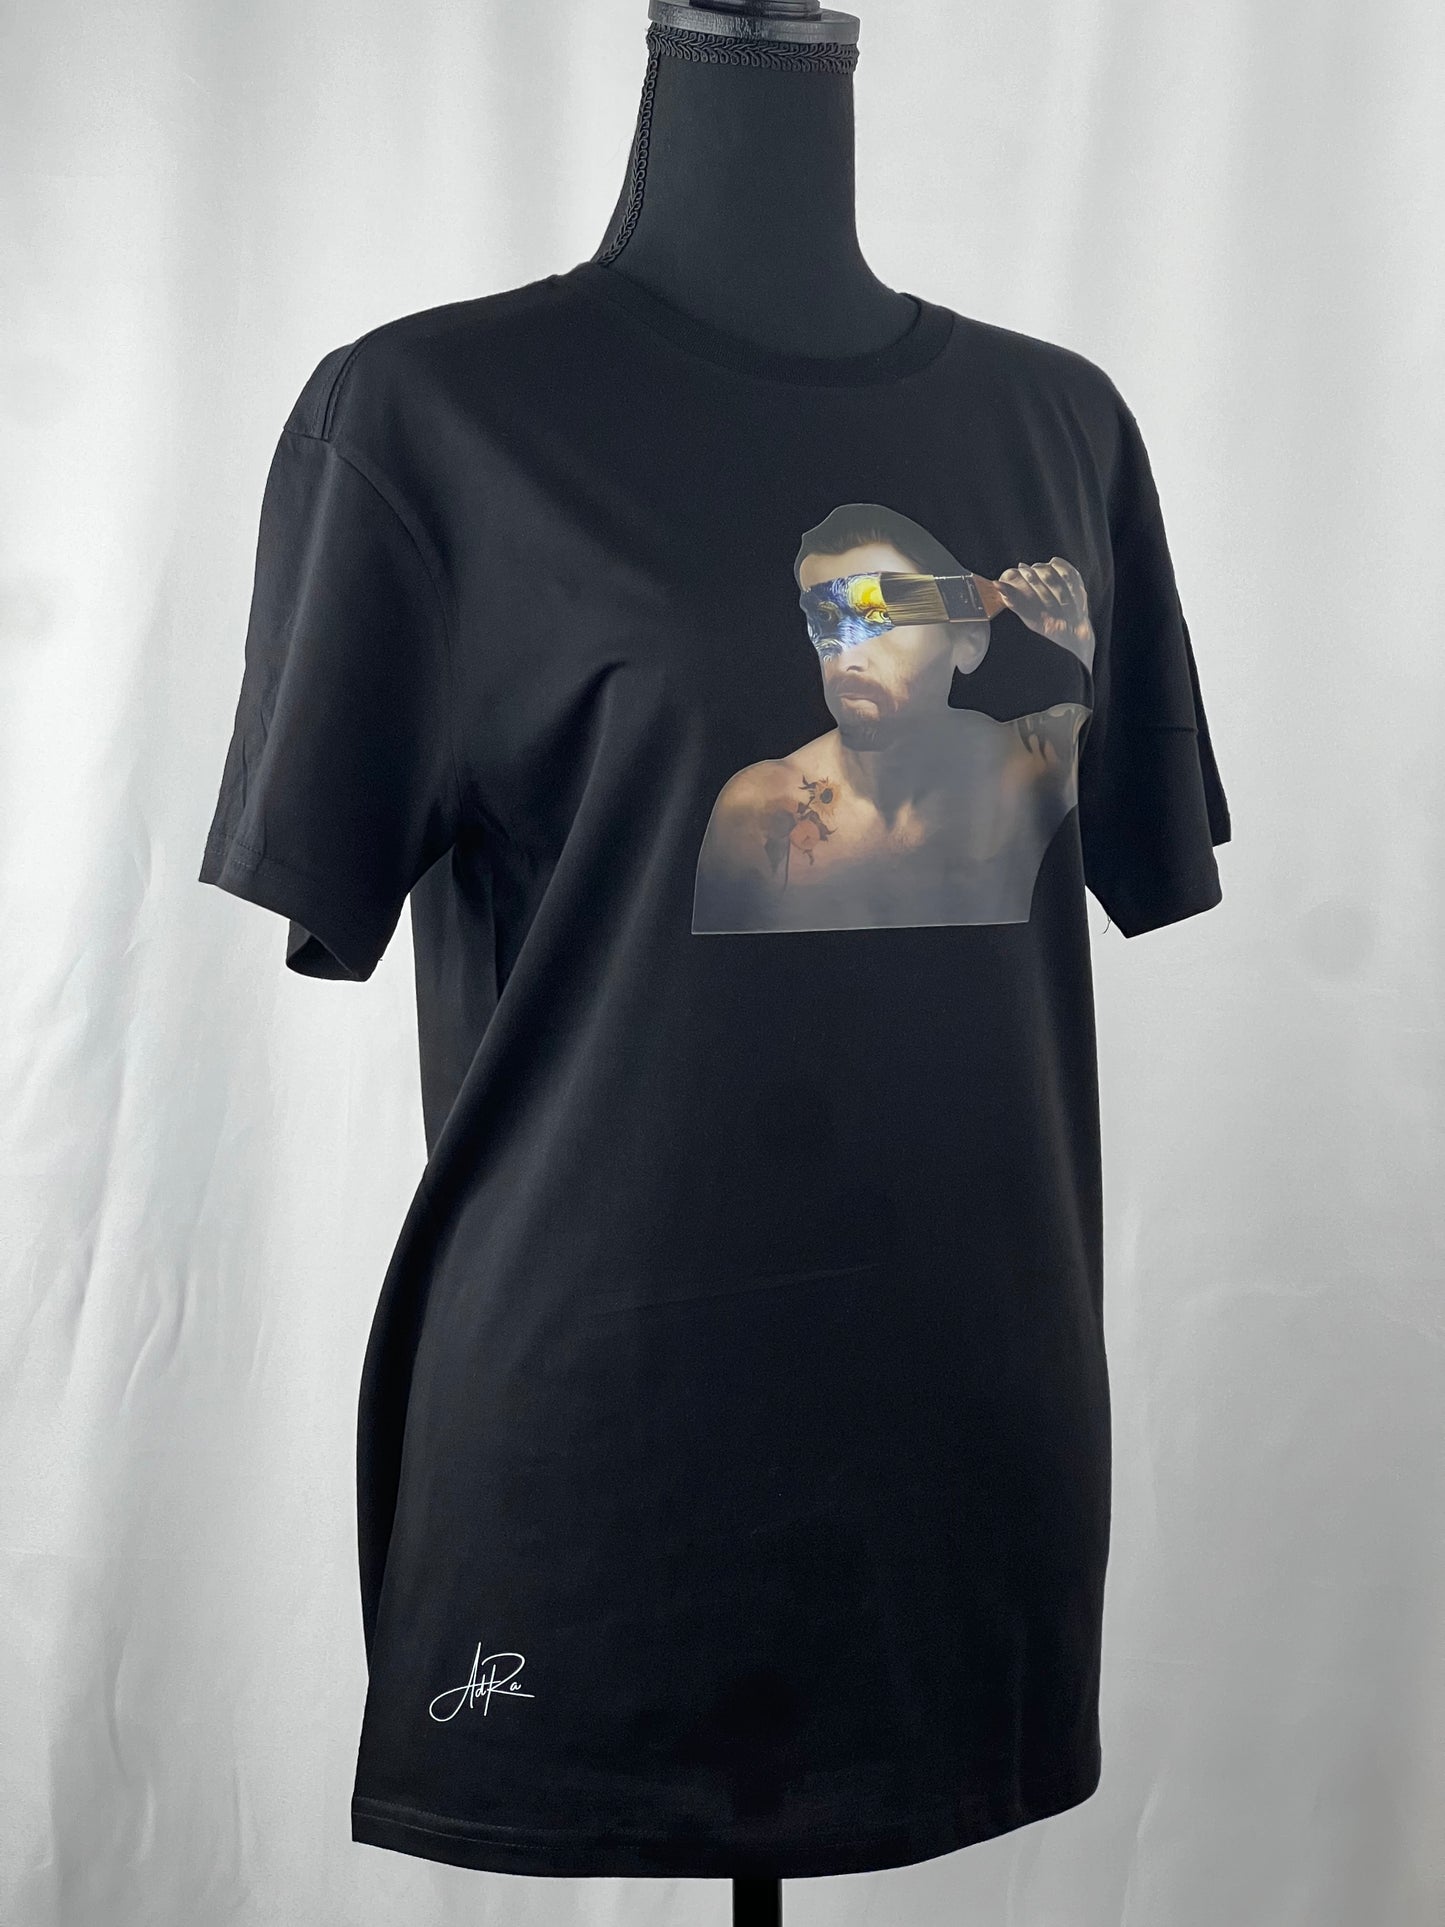 Wear Artistry with Our Vincent van Gogh "The Starry Night" Brushstroke Graphic T-Shirt | Adra Apparel